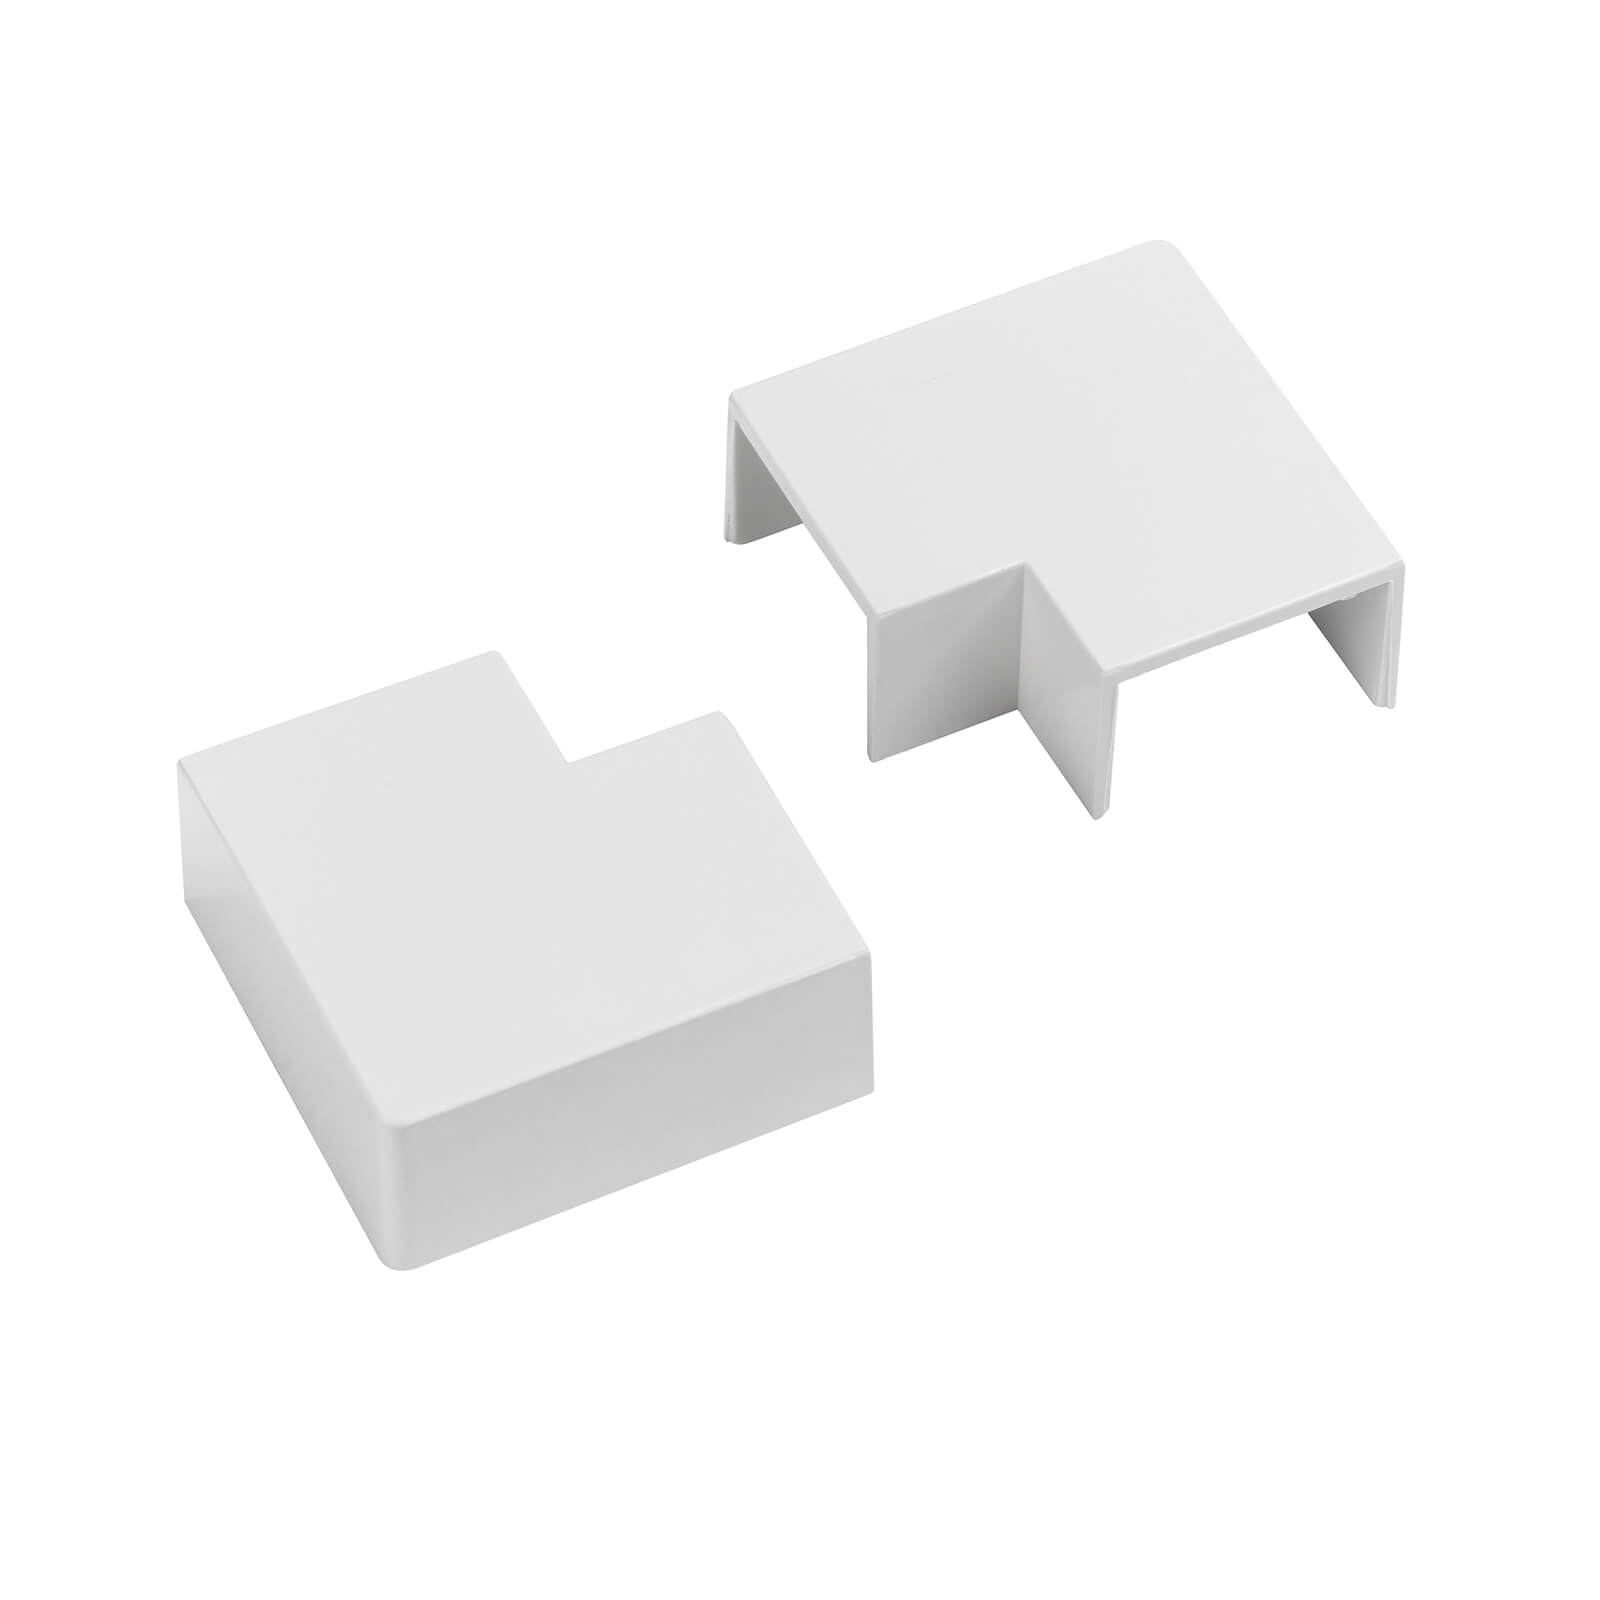 Photo of D-line 25x16mm Trunking Clip-on Flat Bend 2 Pack - White